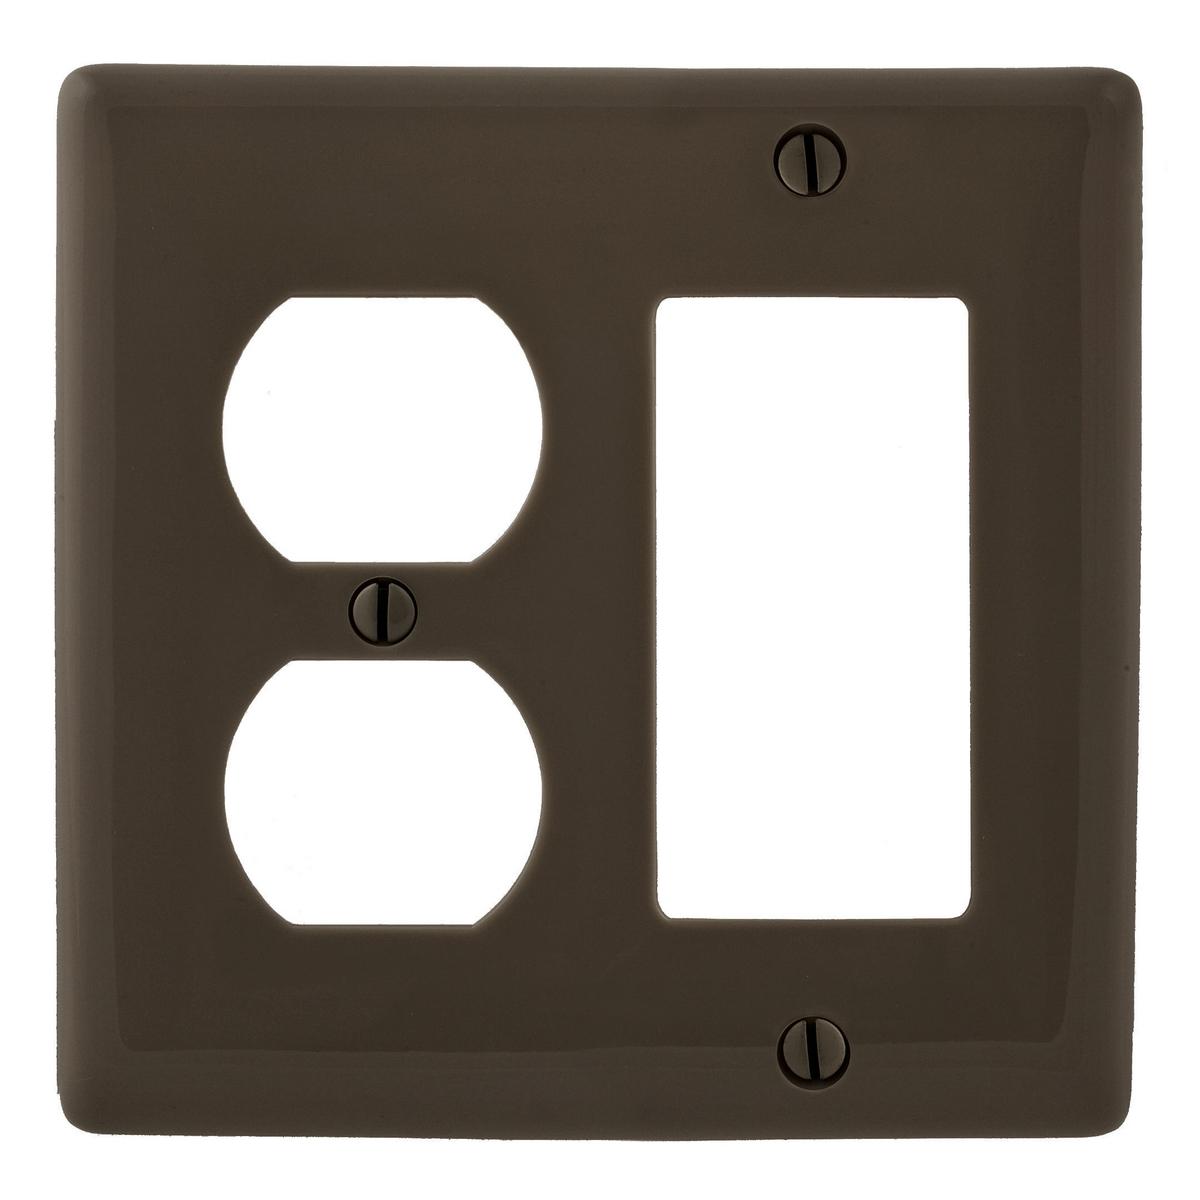 Hubbell NPJ826 Wallplates, Nylon, Mid-Sized, 1-Gang, 1) Duplex, 1) Decorator, Brown  ; Reinforcement ribs for extra strength ; High-impact, self-extinguishing nylon material ; Captive screw feature holds mounting screw in place ; Standard Size is 1/8" larger to give you